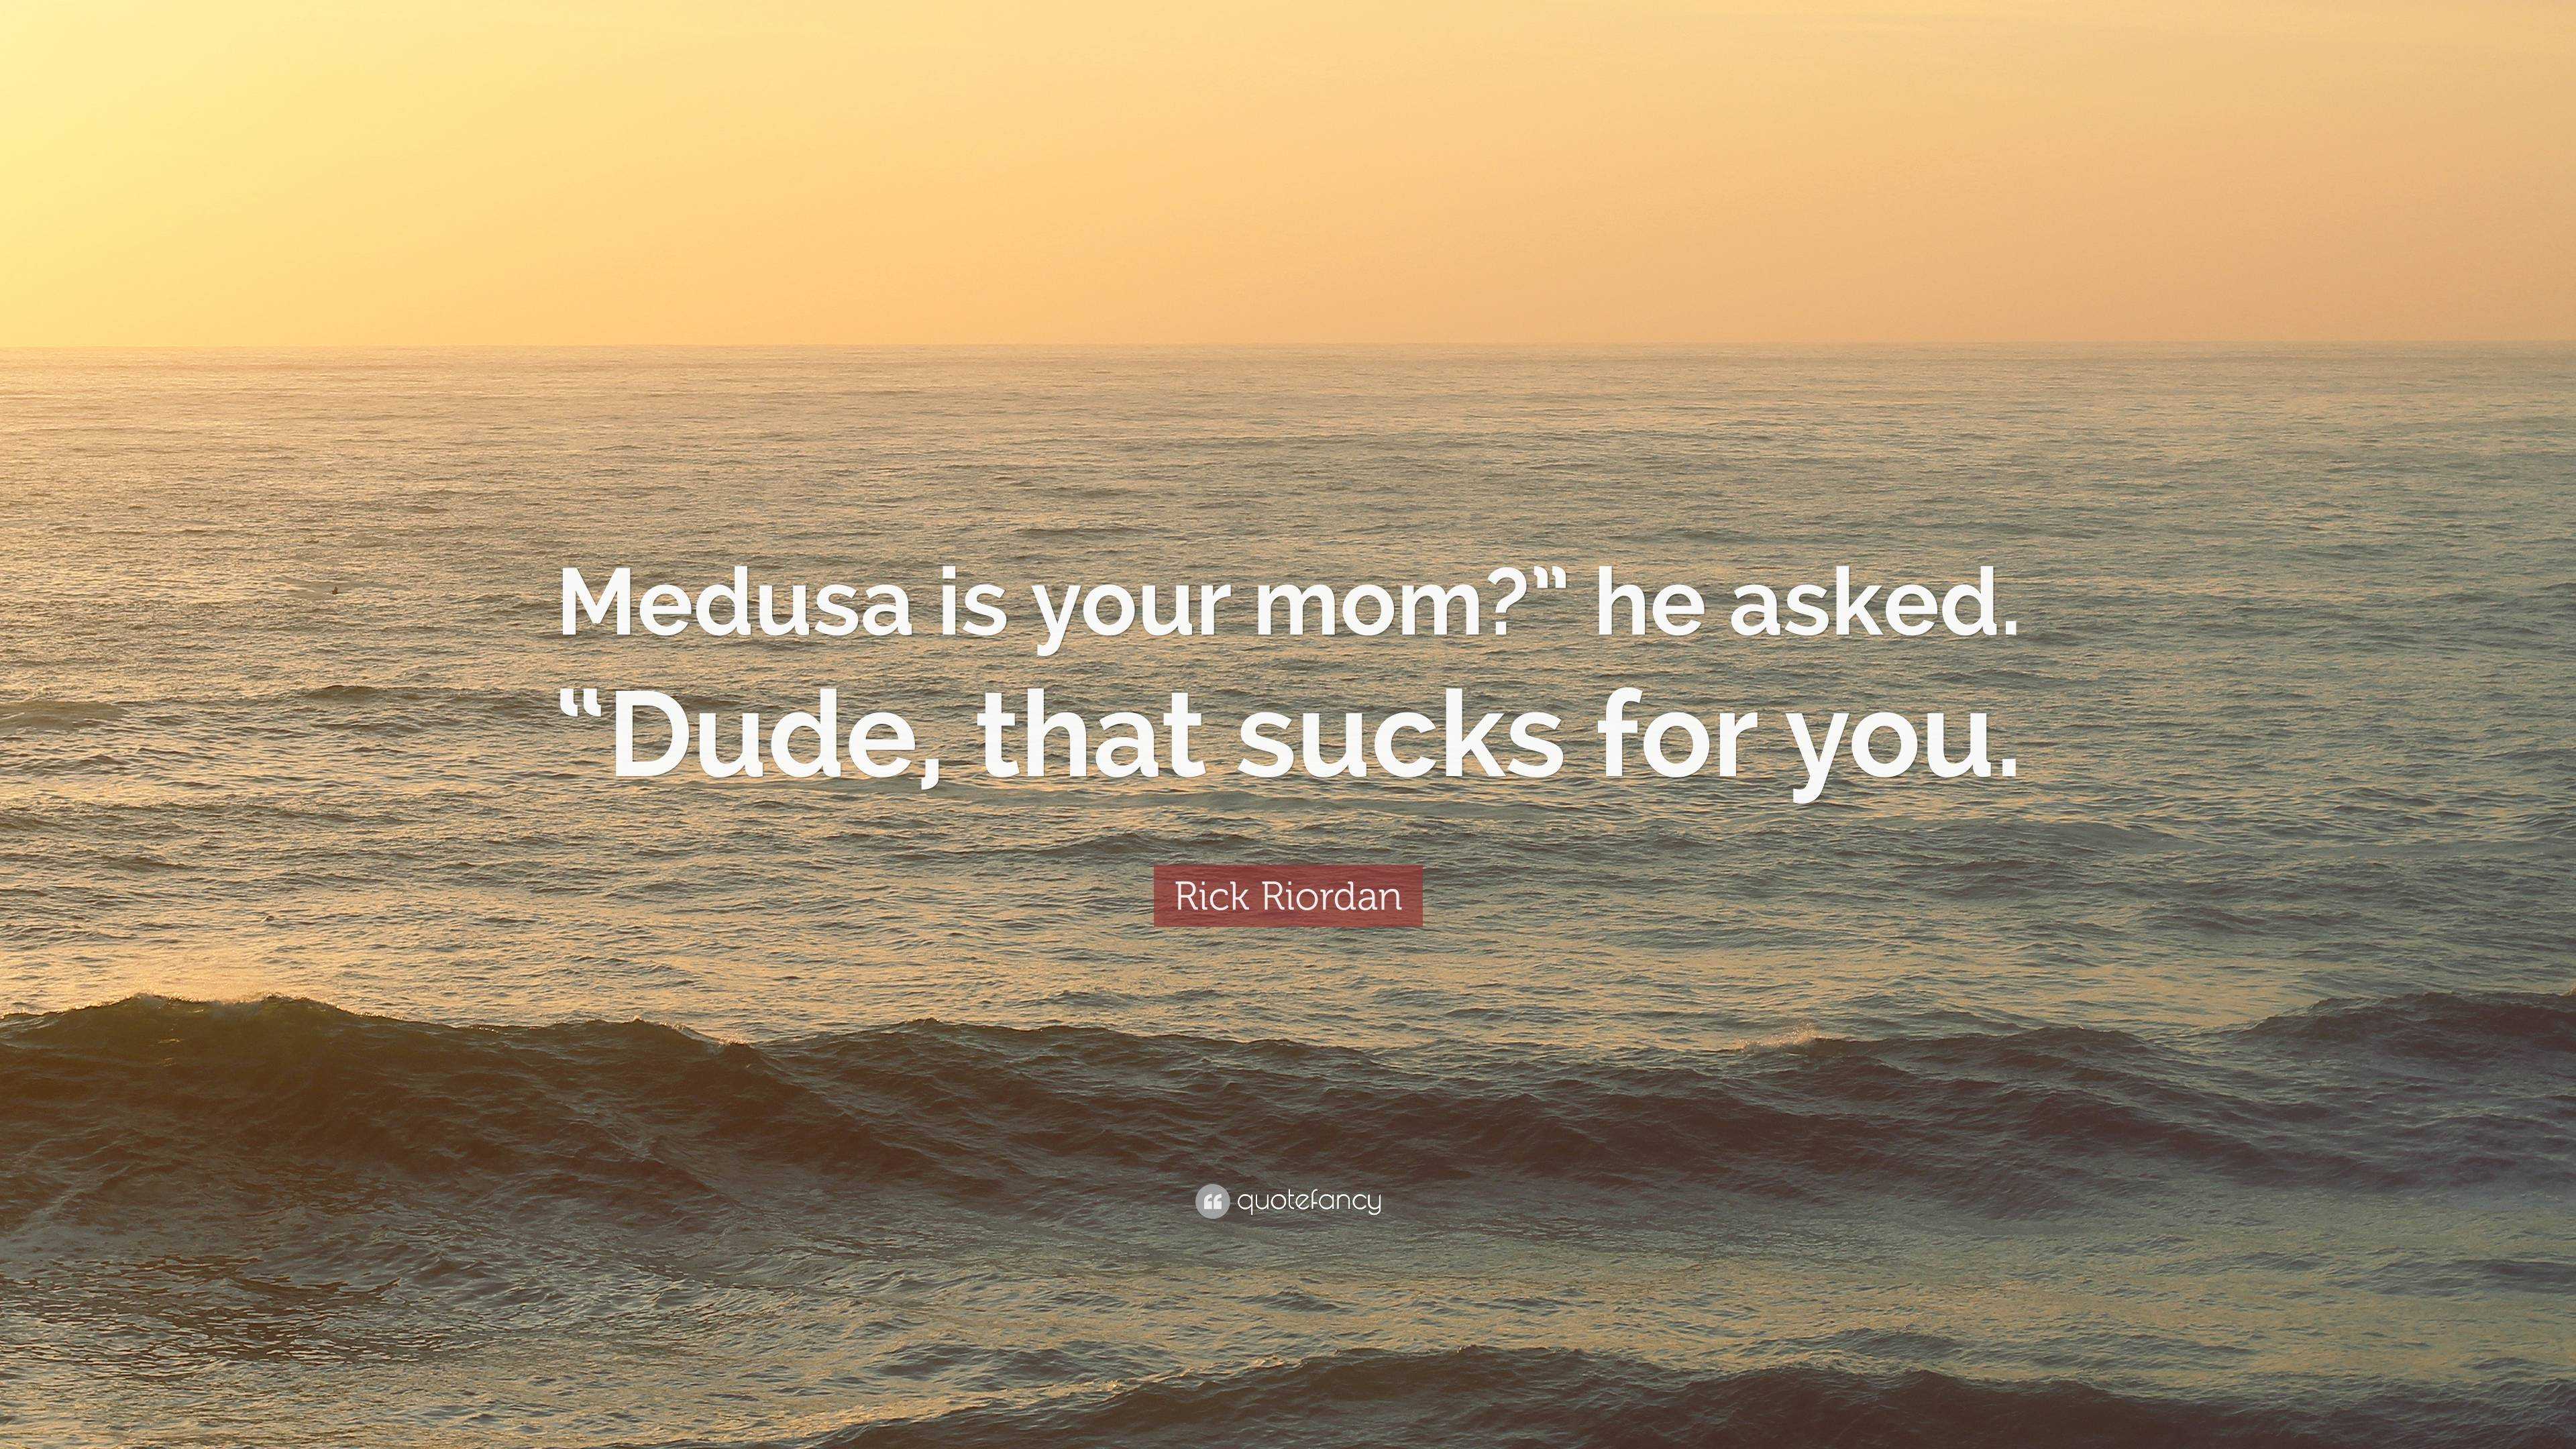 Rick Riordan Quote “medusa Is Your Mom” He Asked “dude That Sucks For You”